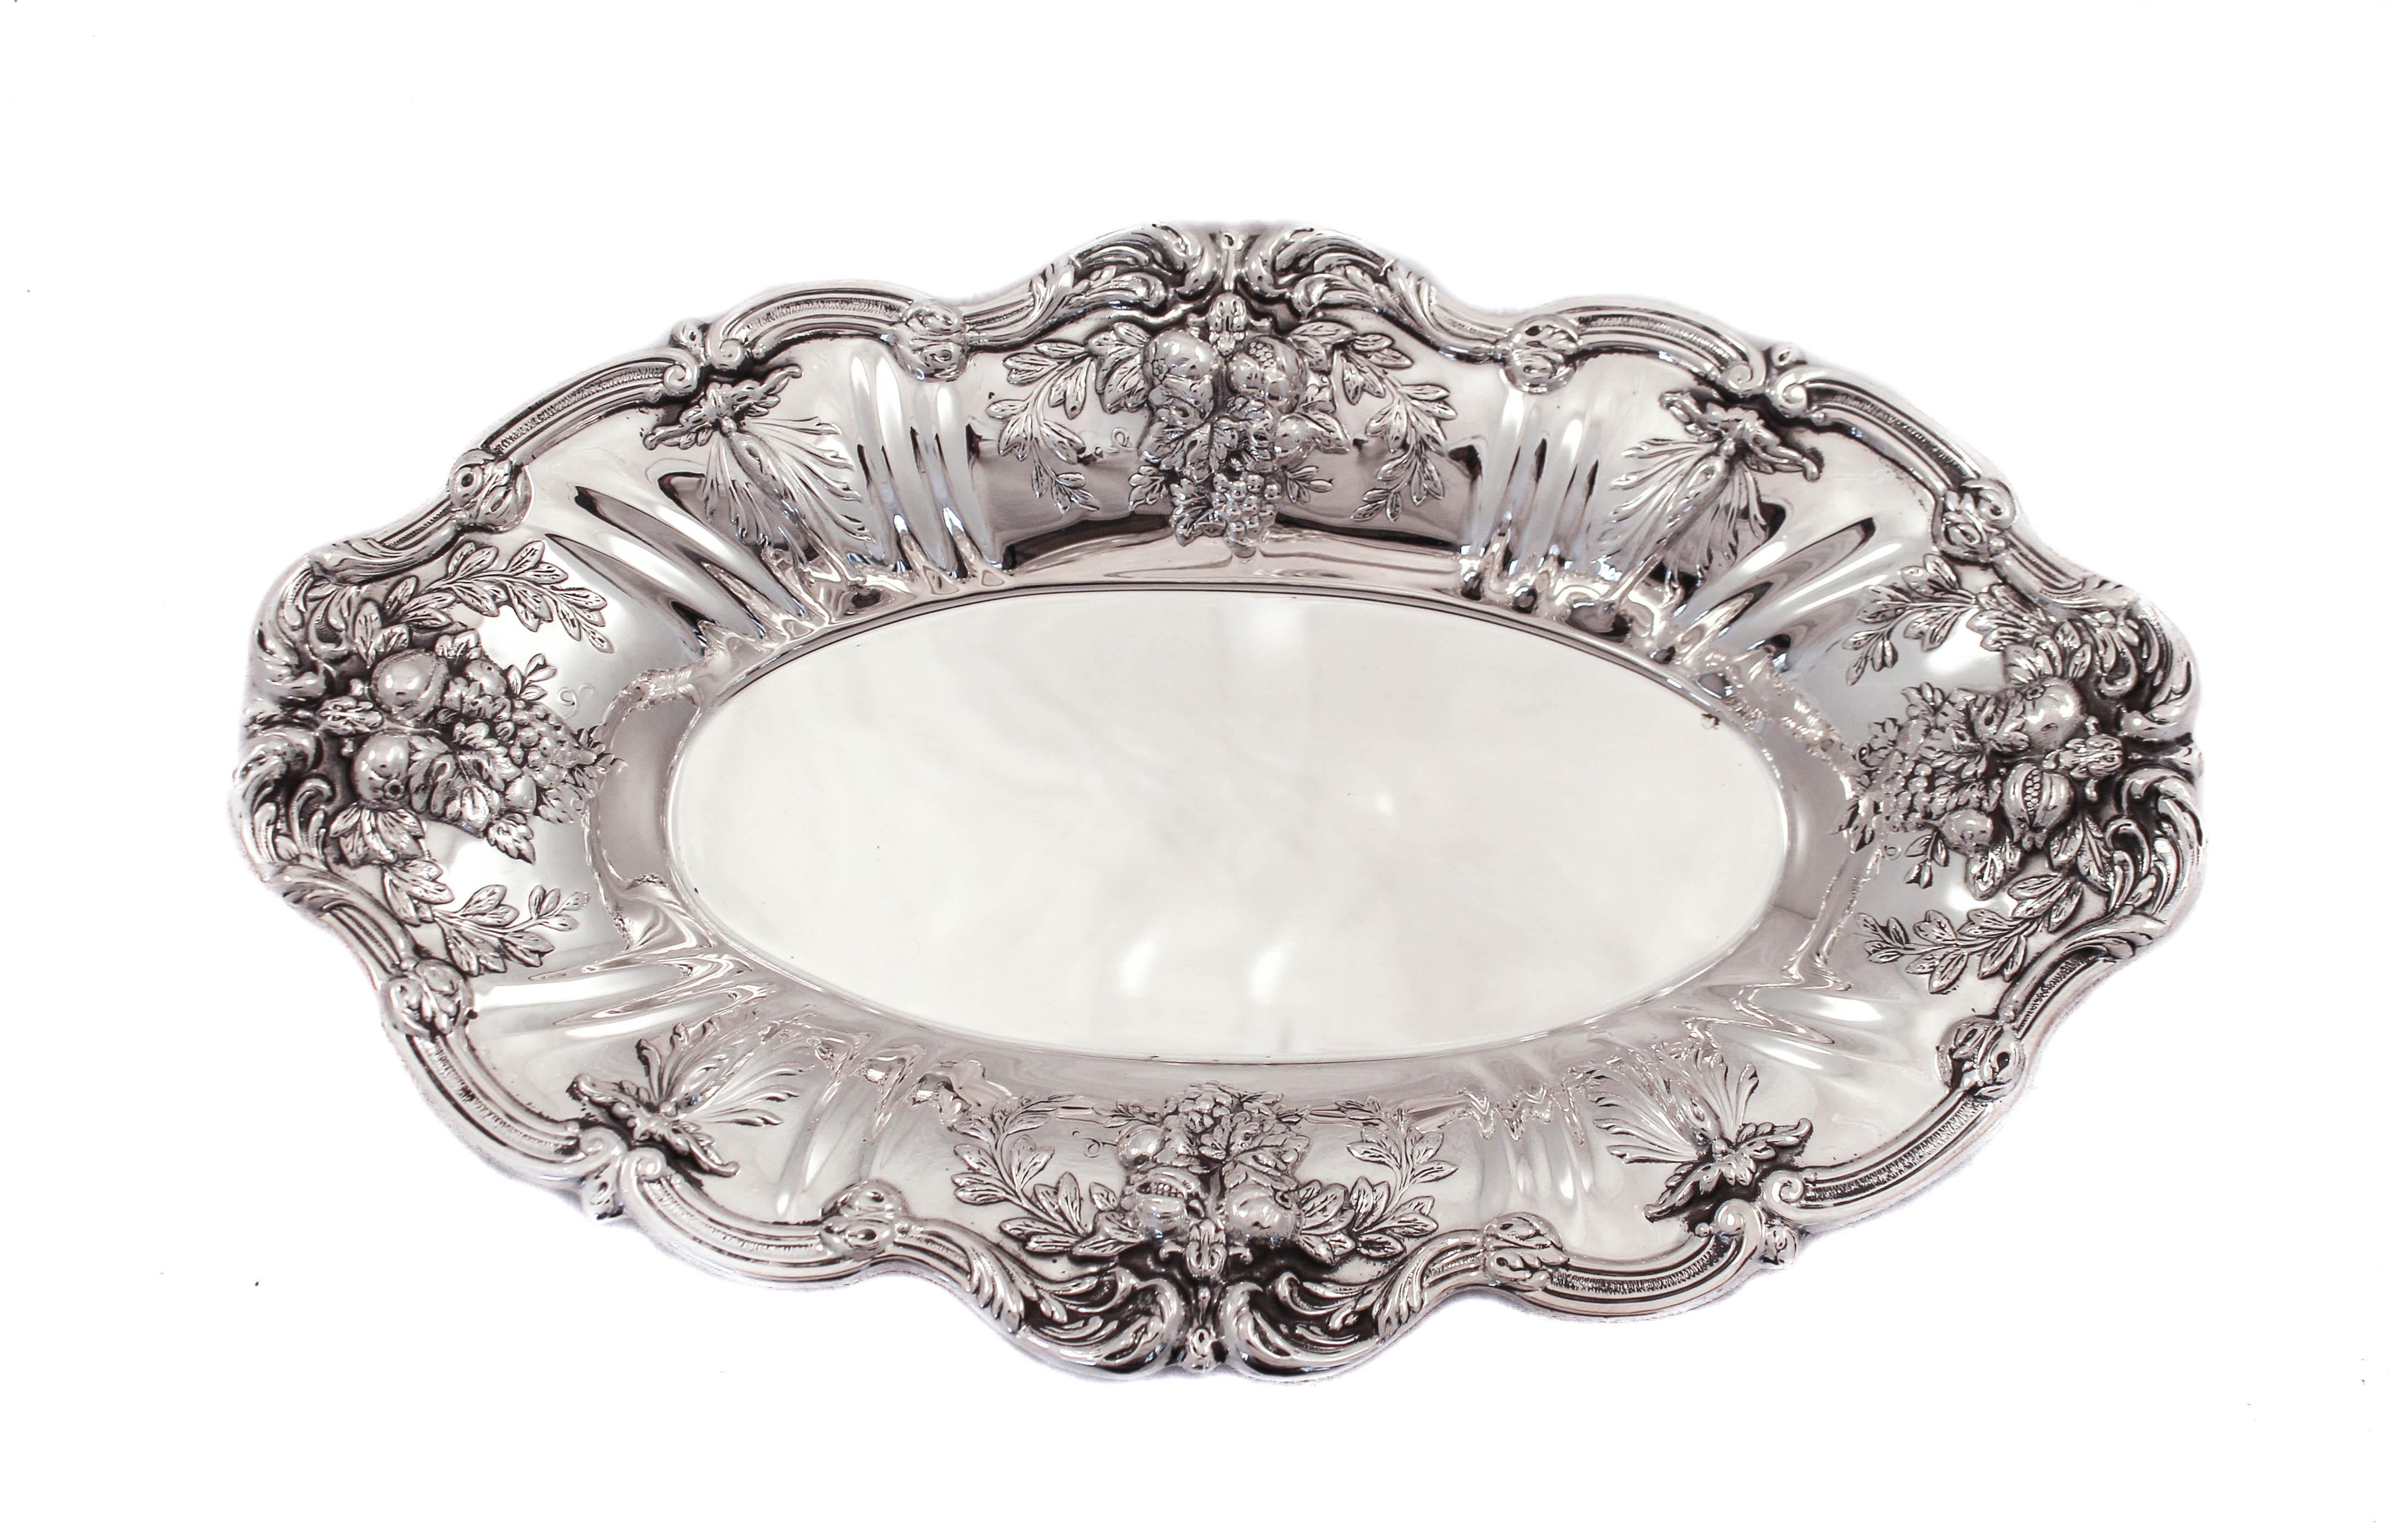 The Francis I pattern by Reed and Barton is the companies most iconic design. World famous and still highly sought after until today, and for good reason. Clusters of fruit and flowers drape the edges. A scalloped rim with four wreaths add to its